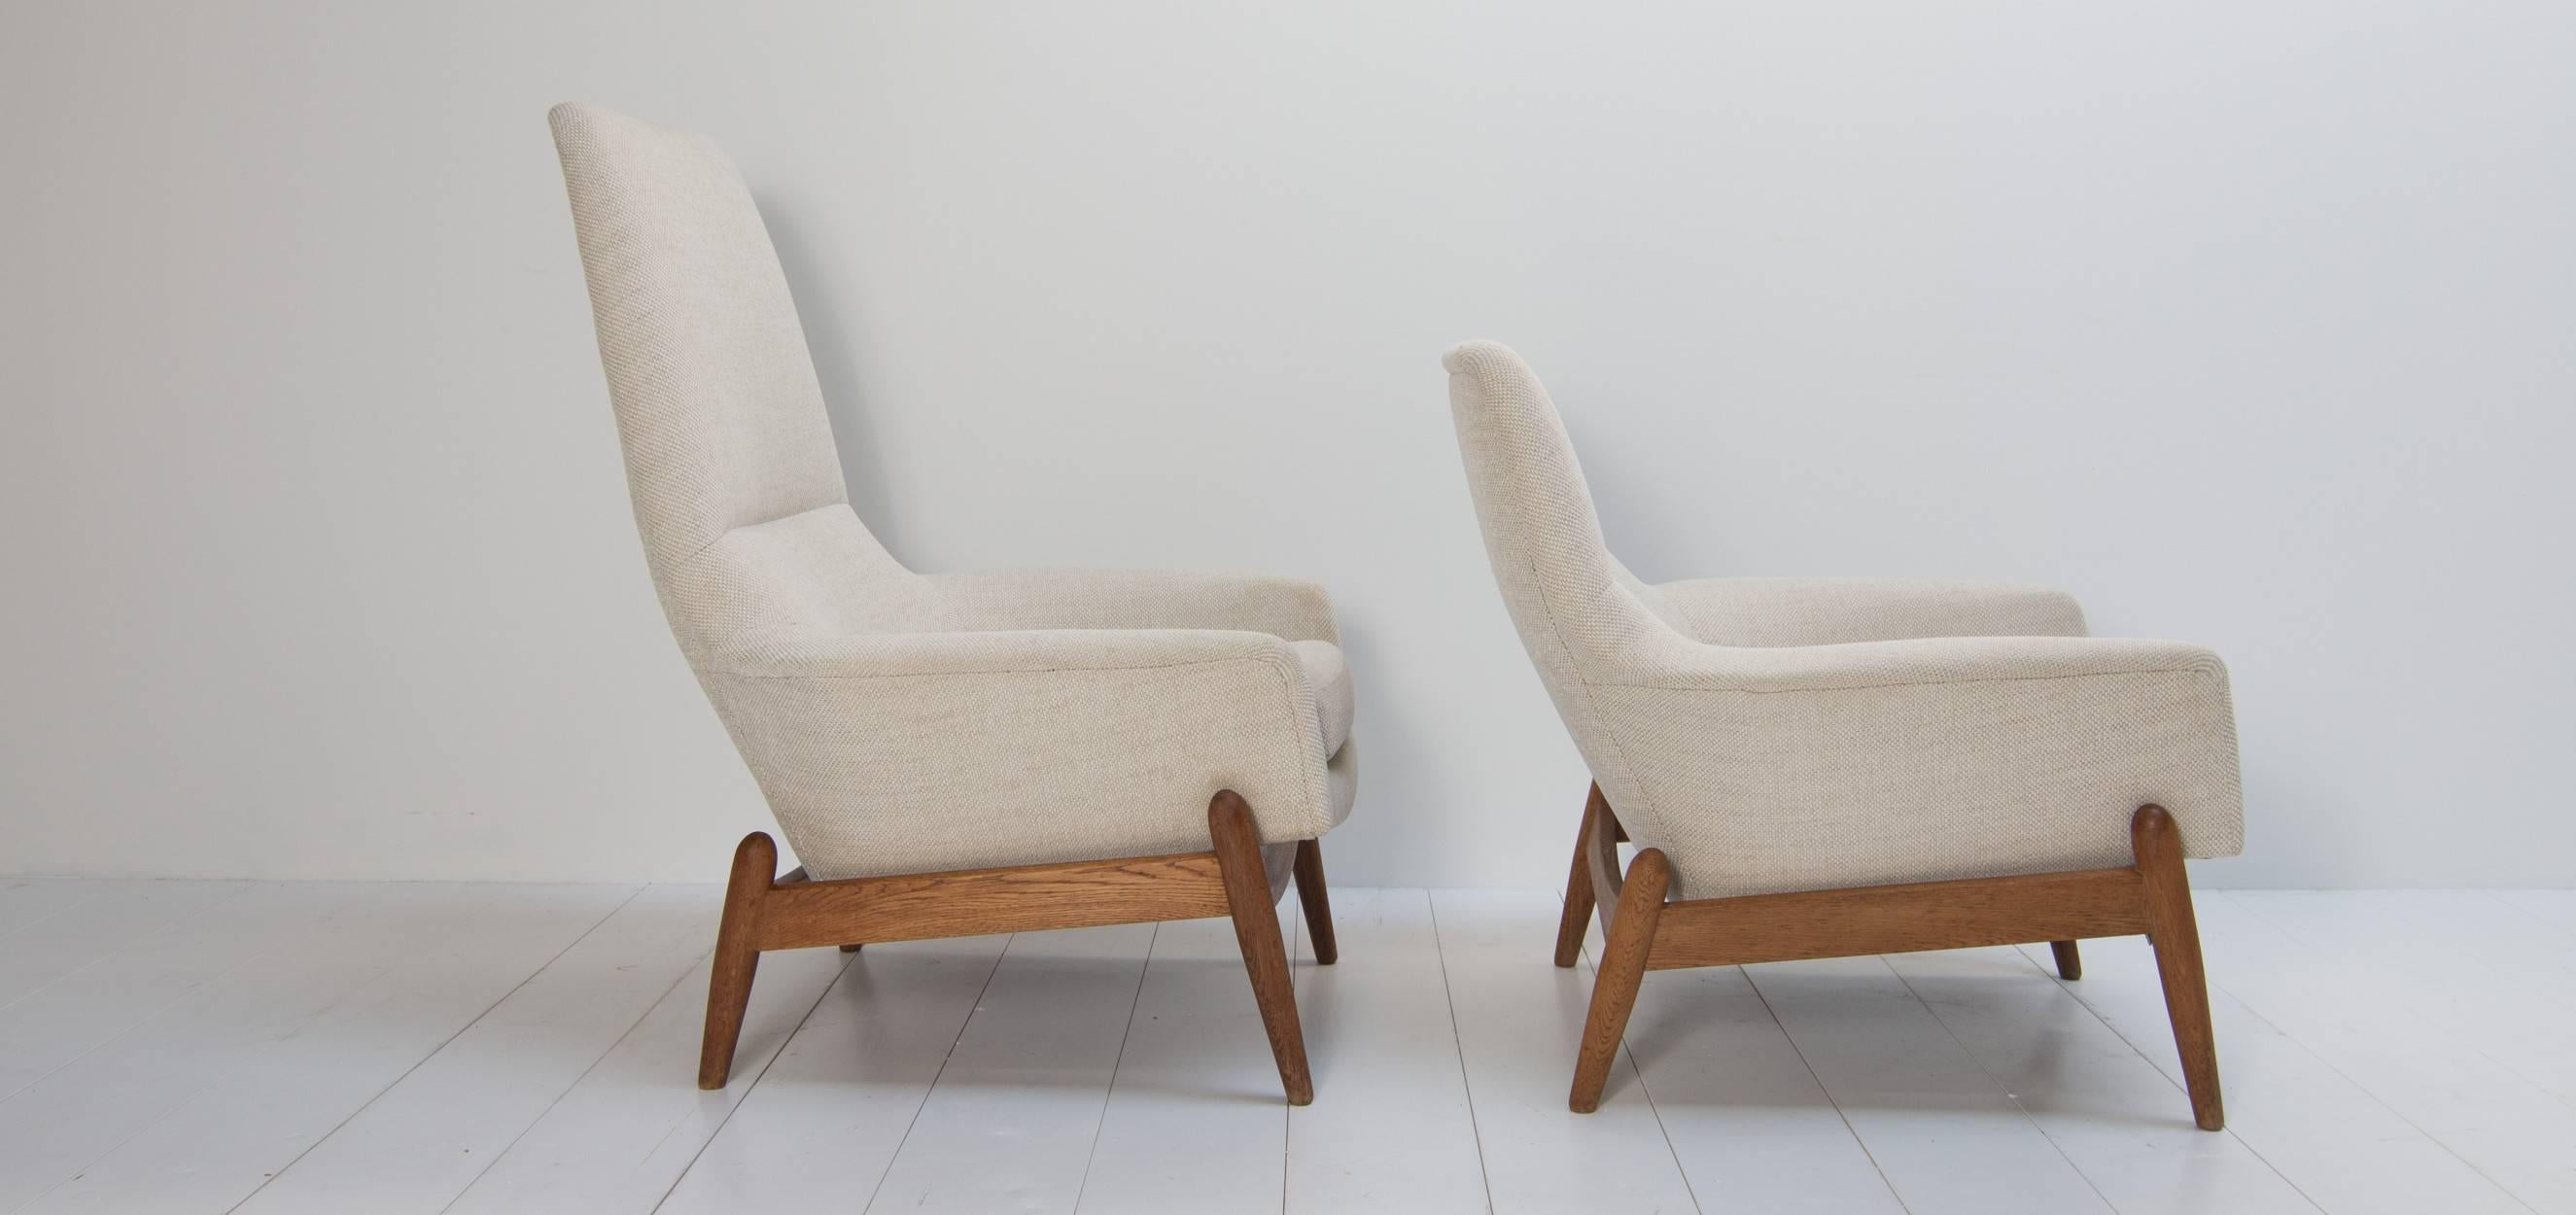 Bovenkamp lounge chairs upholstered in off-white fabric with oak frame. Ib Kofod-Larsen designed this vintage lounge chairs in the 1960s for the Dutch brand Bovenkamp. The set has one 'male lounge chair' and one 'female lounge chair'.

The Design